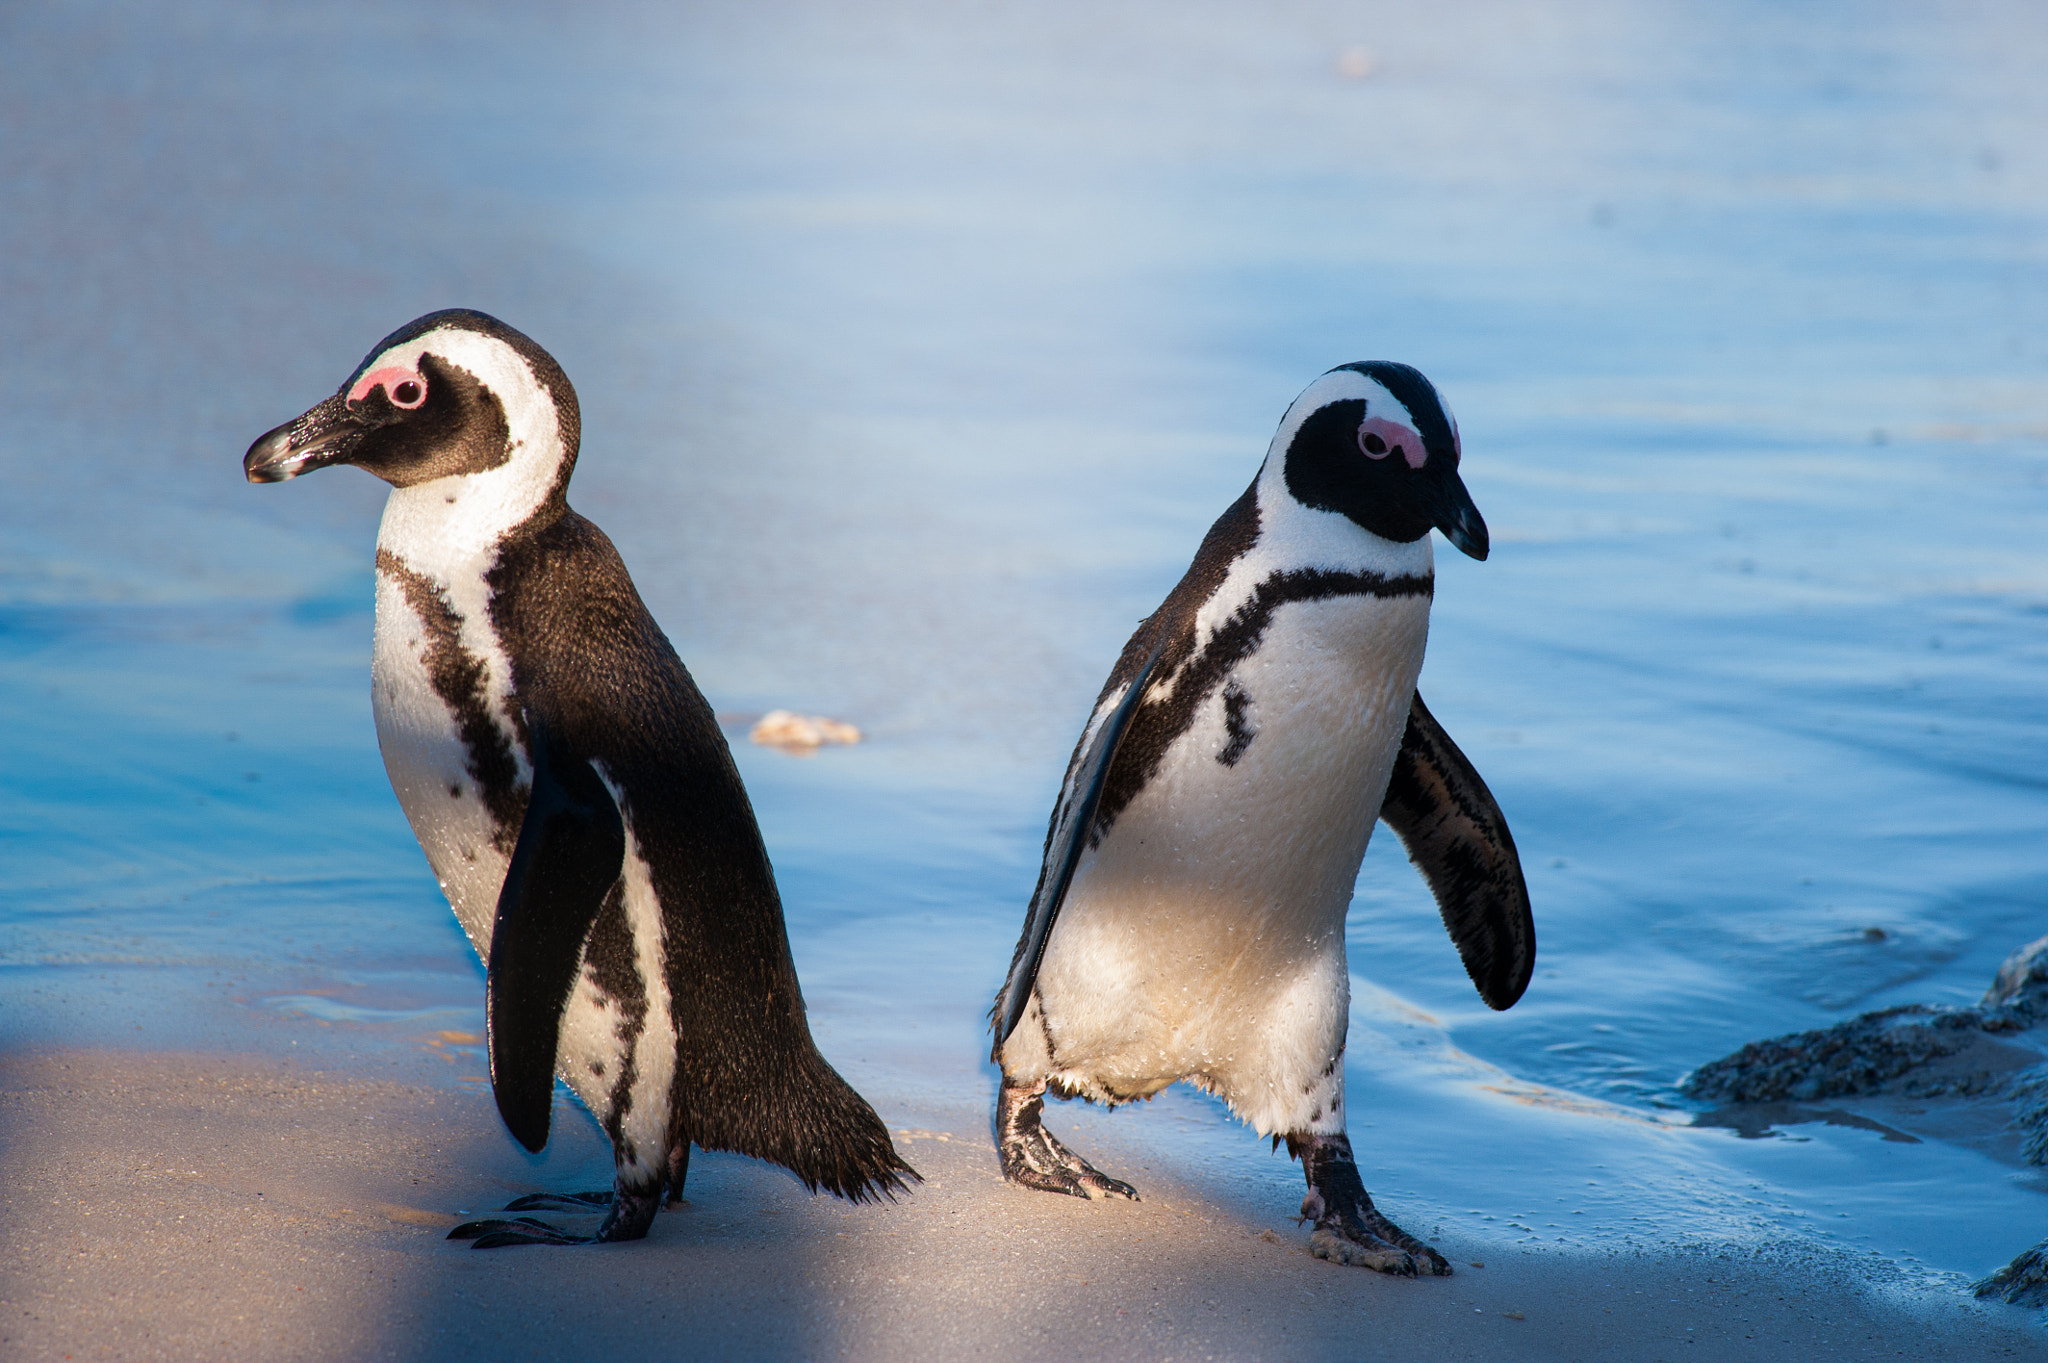 Nikon D700 sample photo. Two penguins at the beach photography